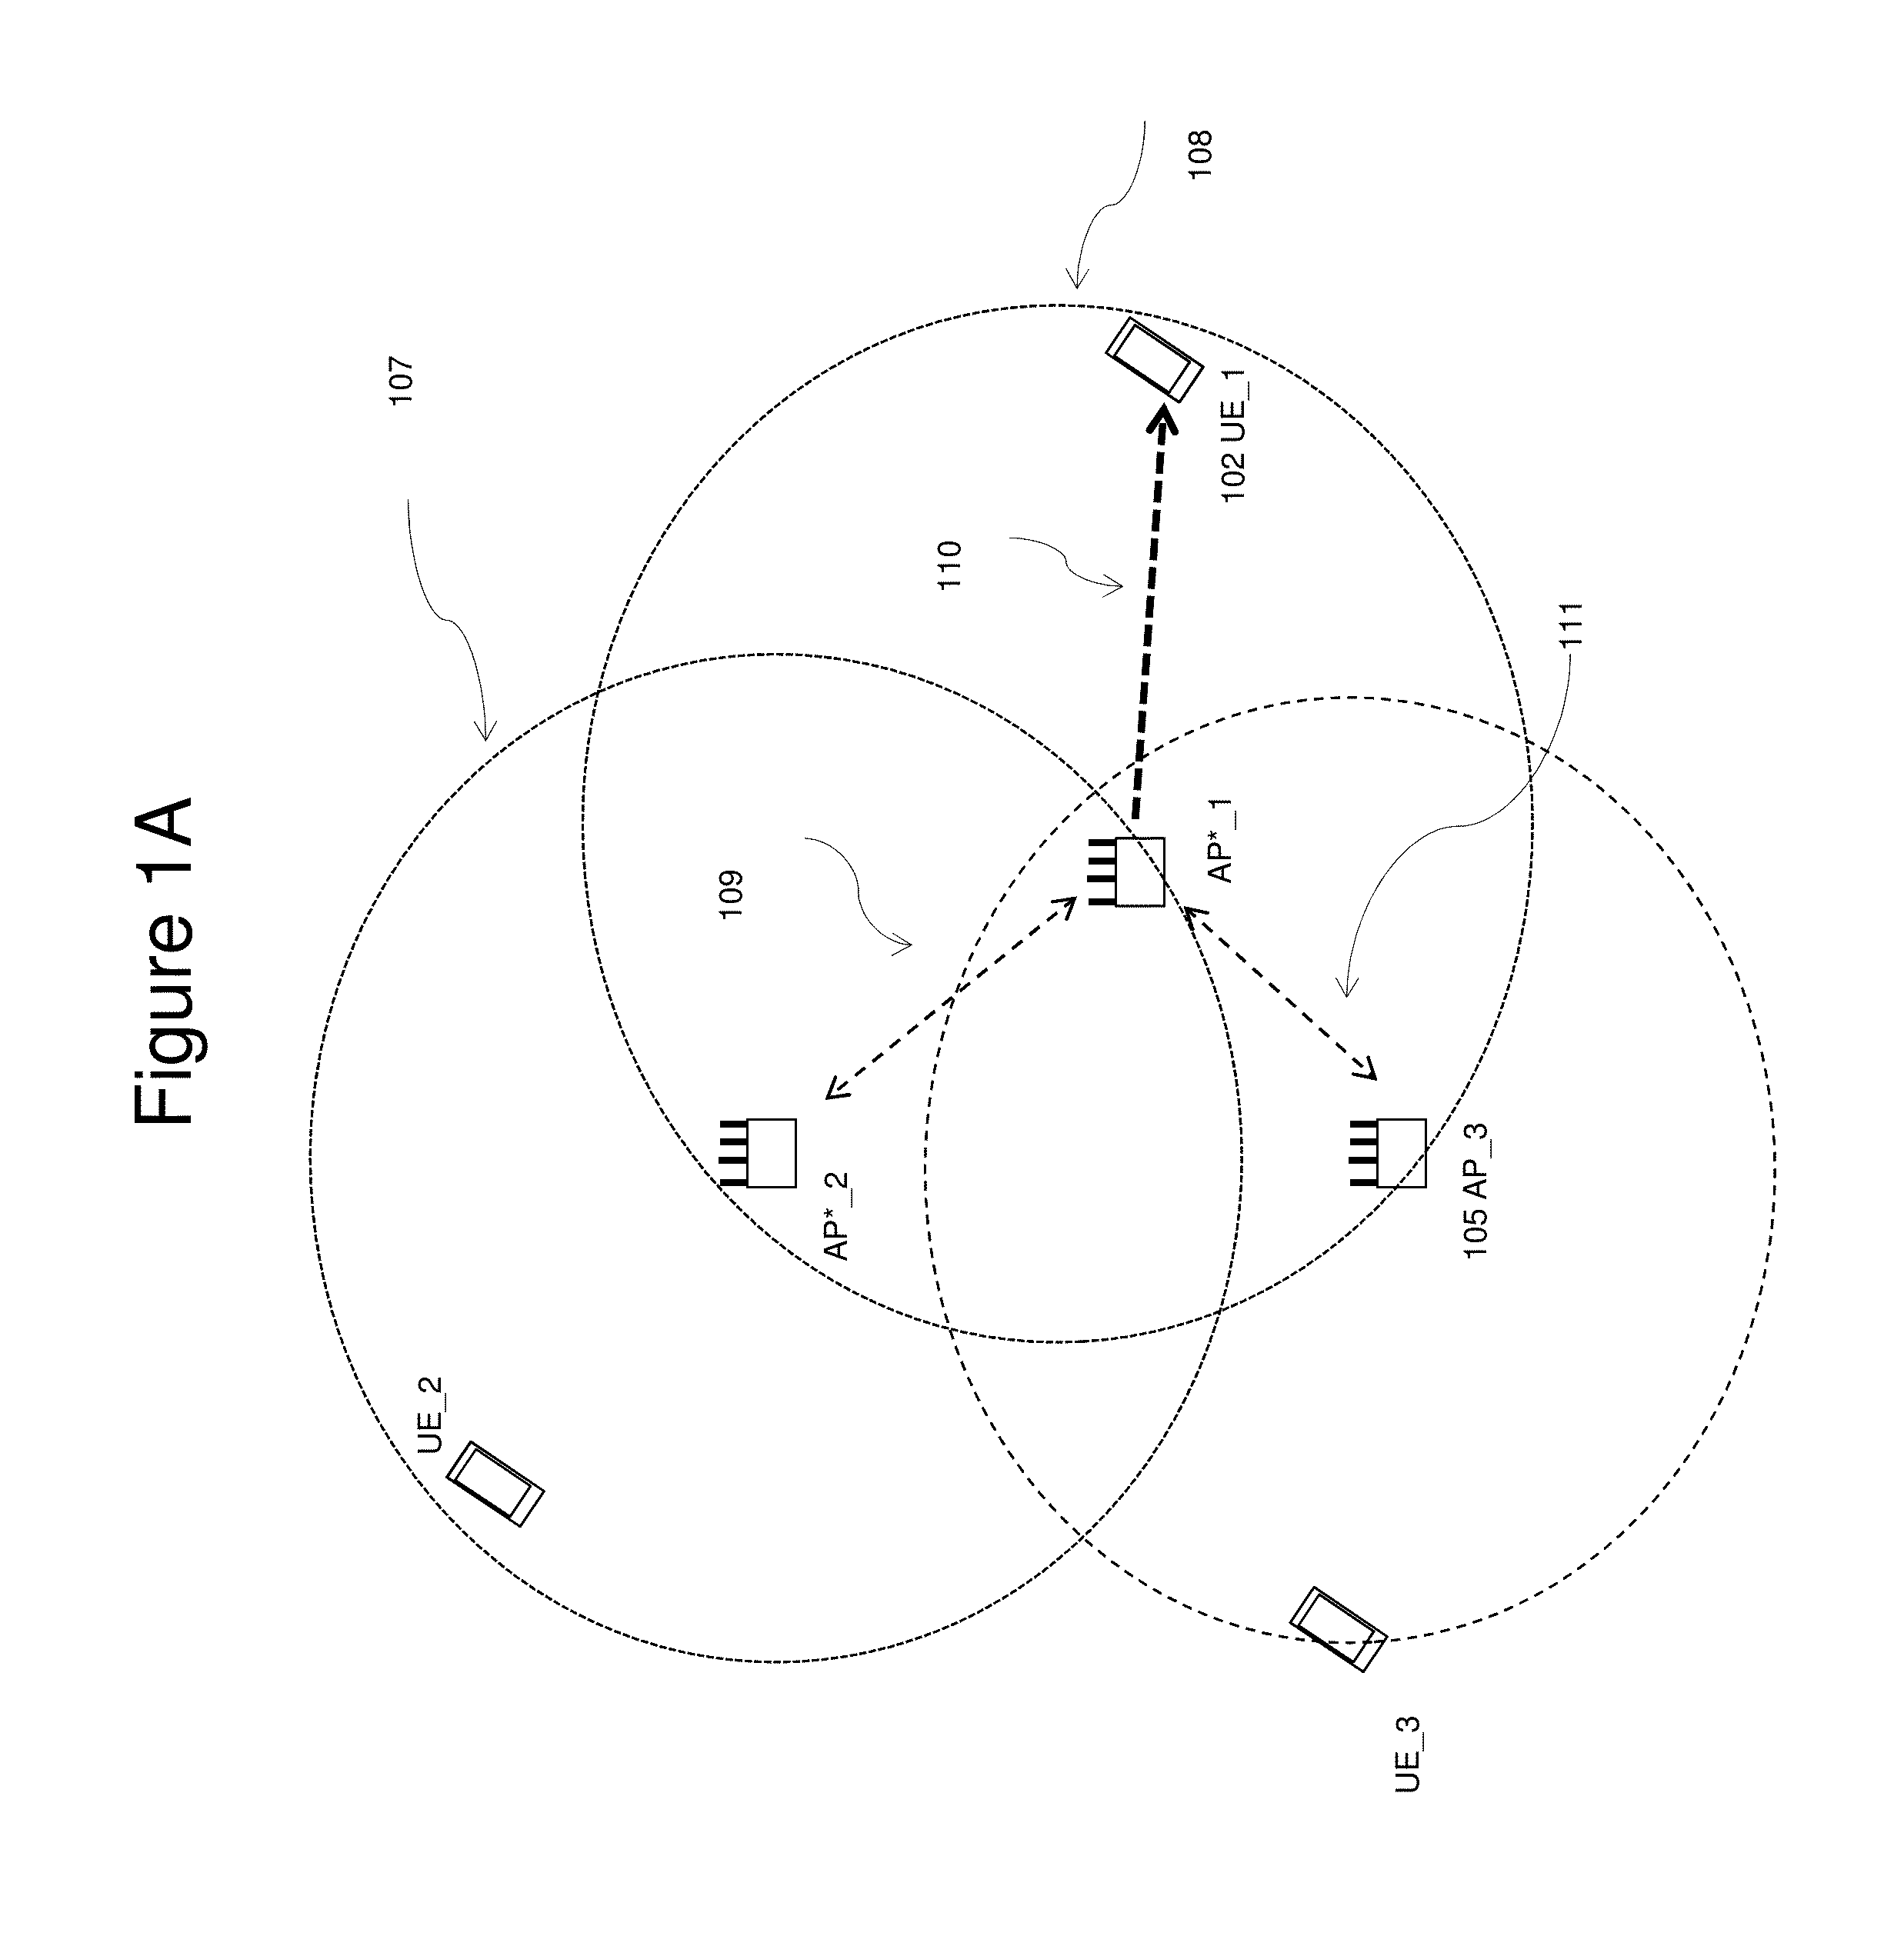 System and method for explicit channel sounding between access points